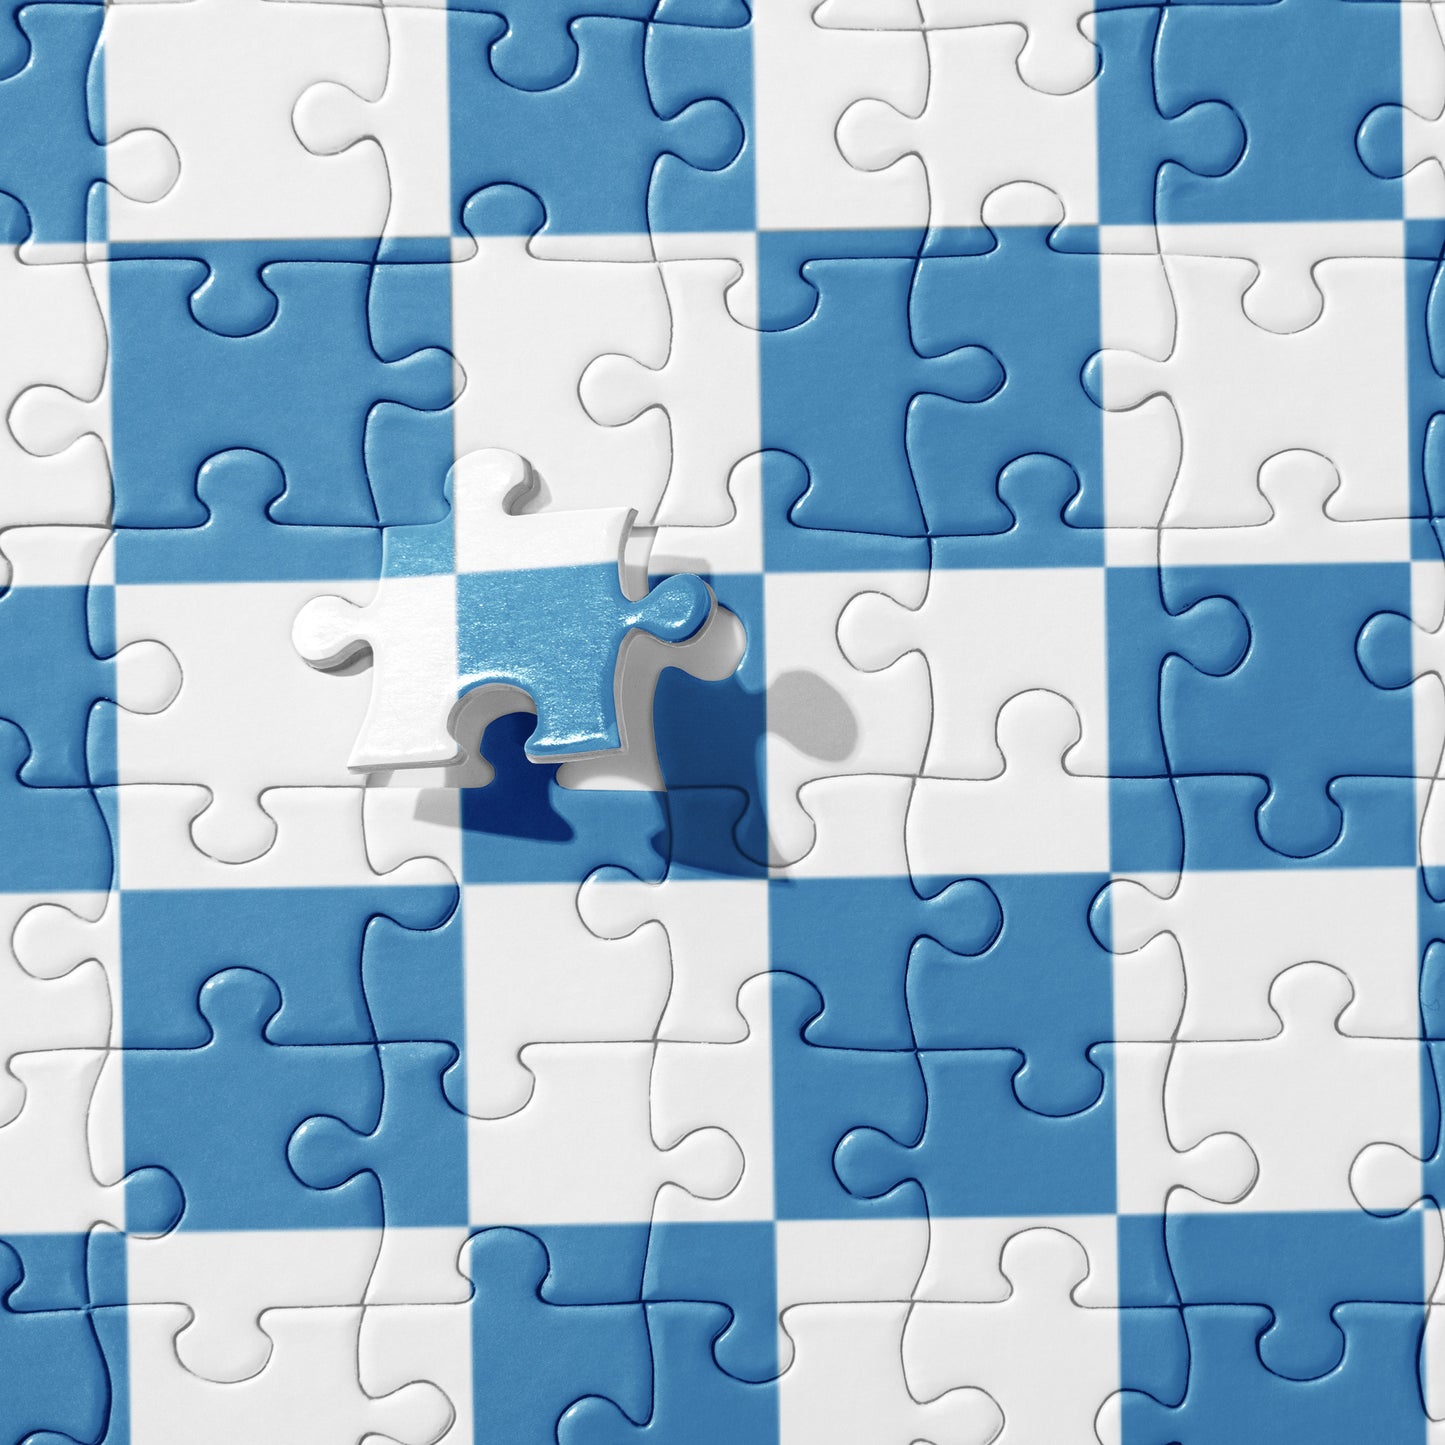 WONKY CHECKED SPLATTERED JIGSAW PUZZLE in BLUE